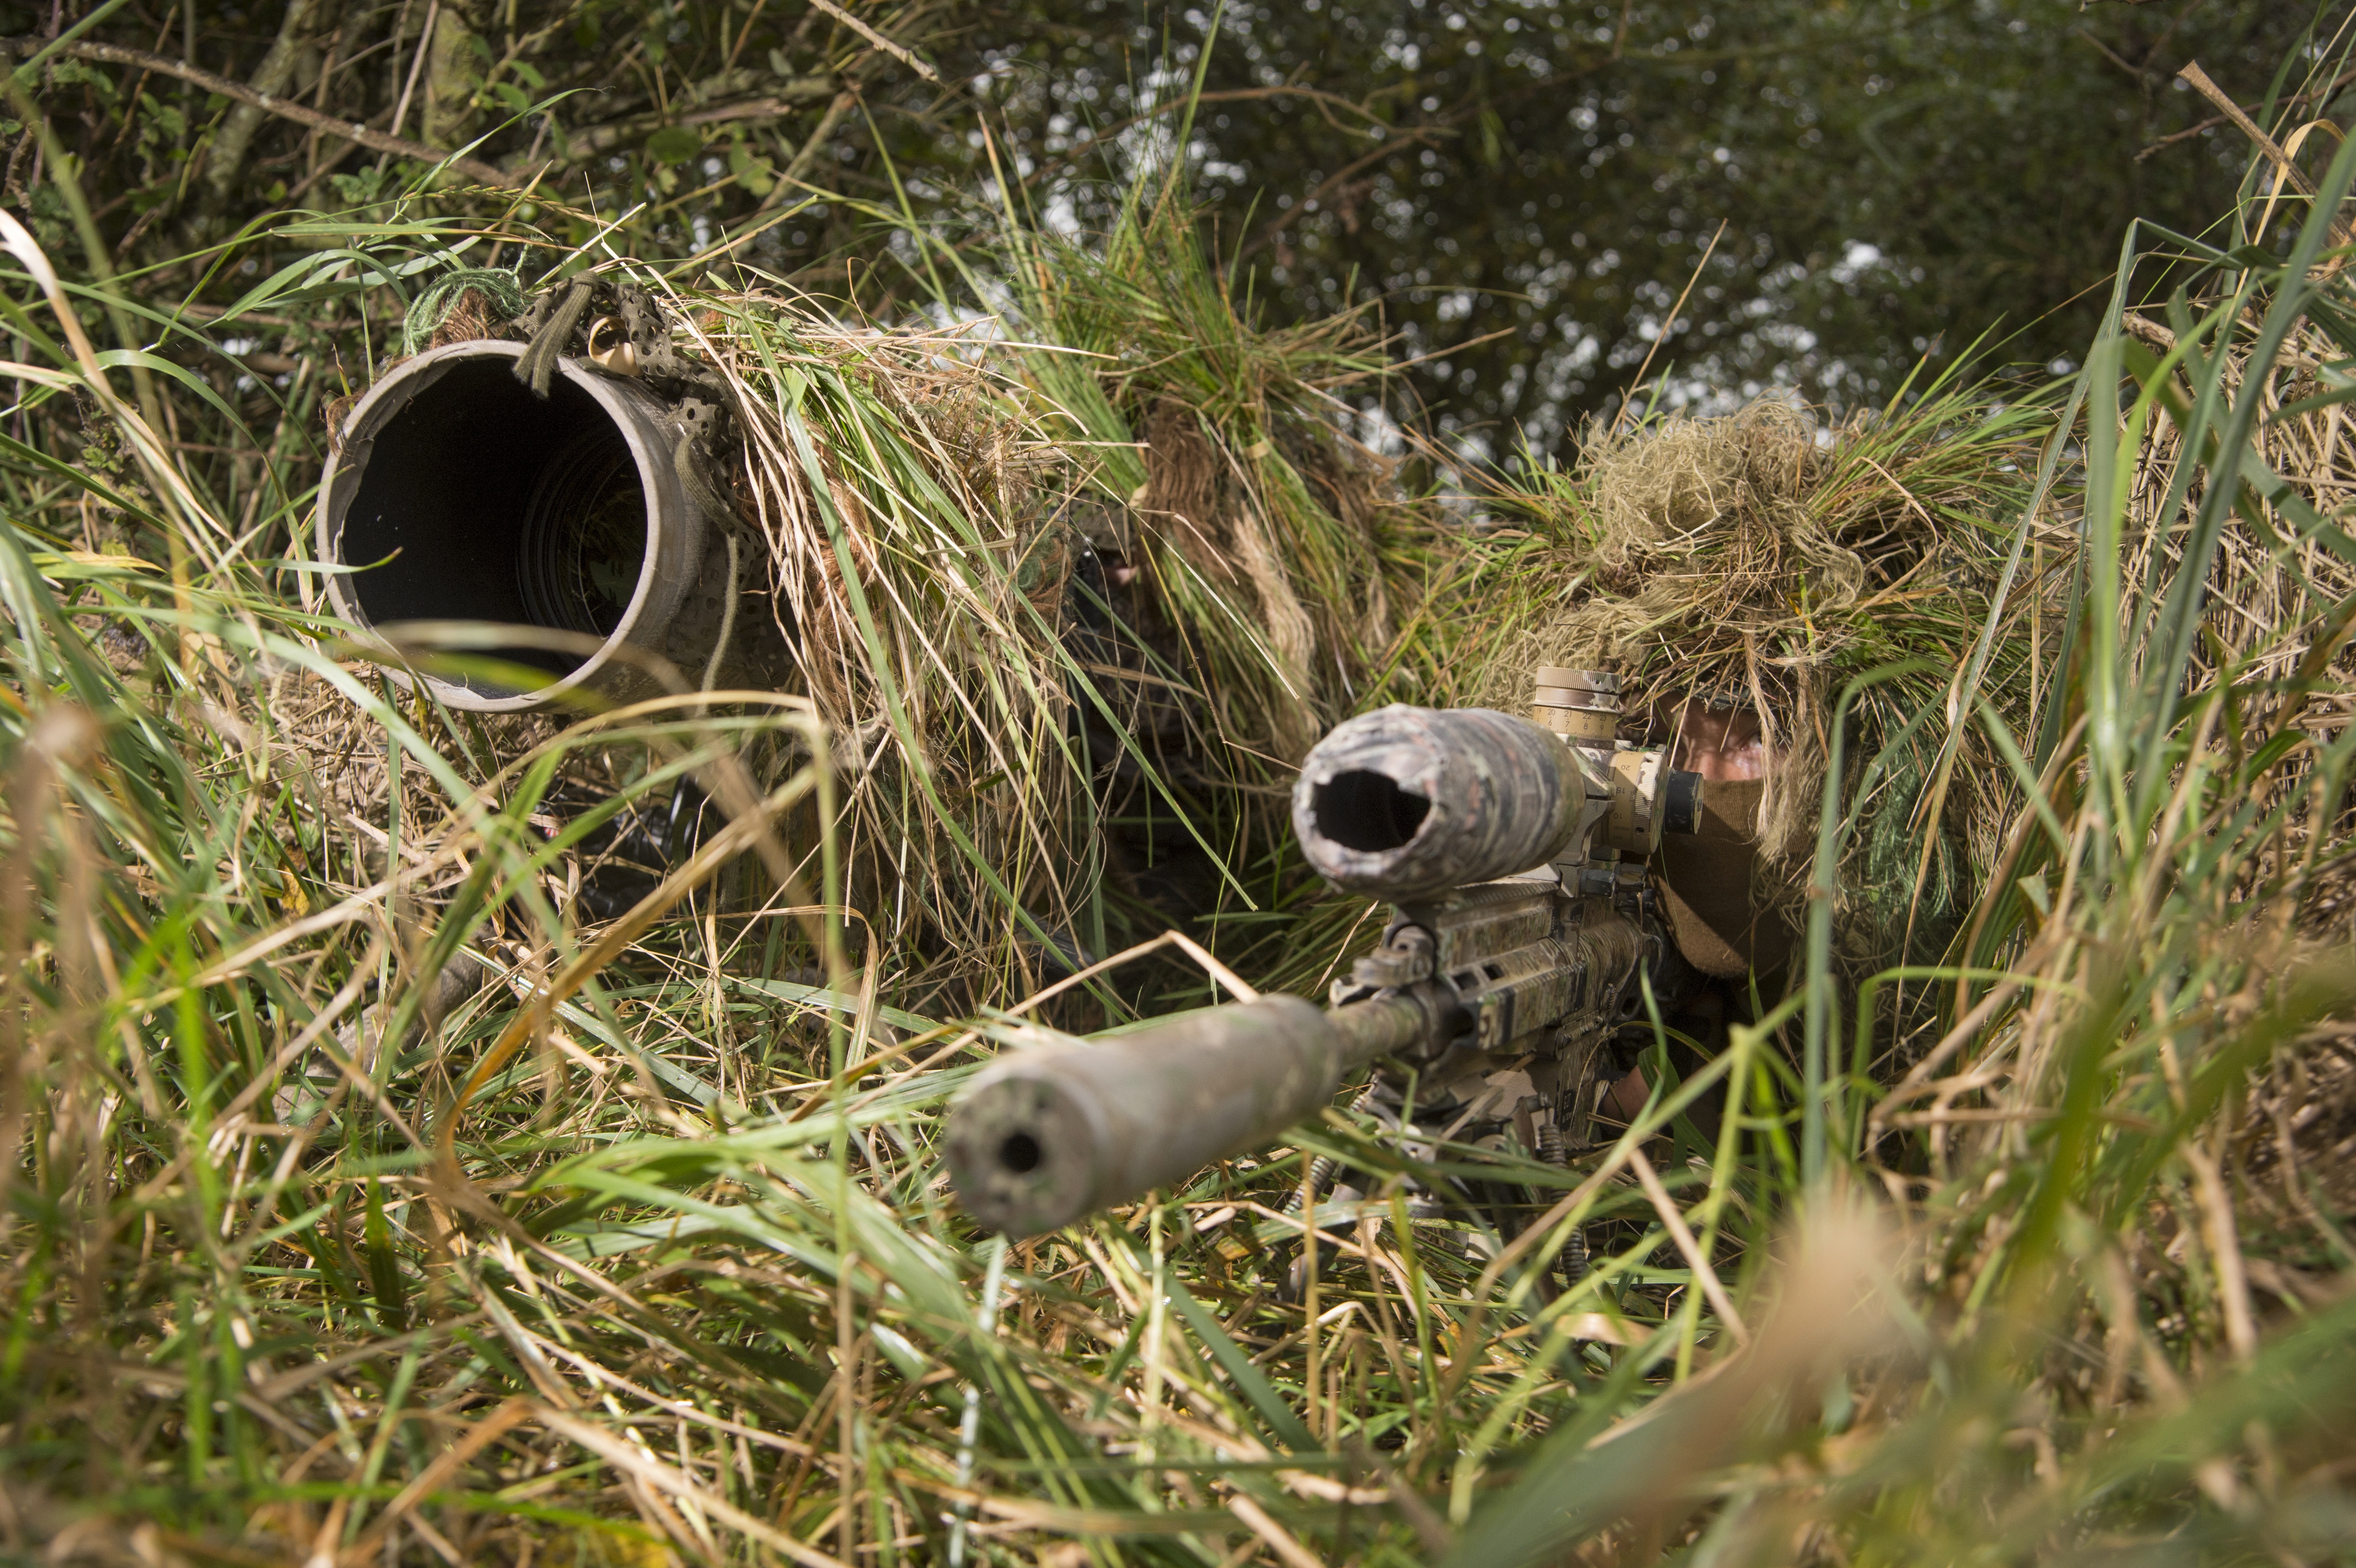 sniper rifle, military, sniper, camouflage, grass images